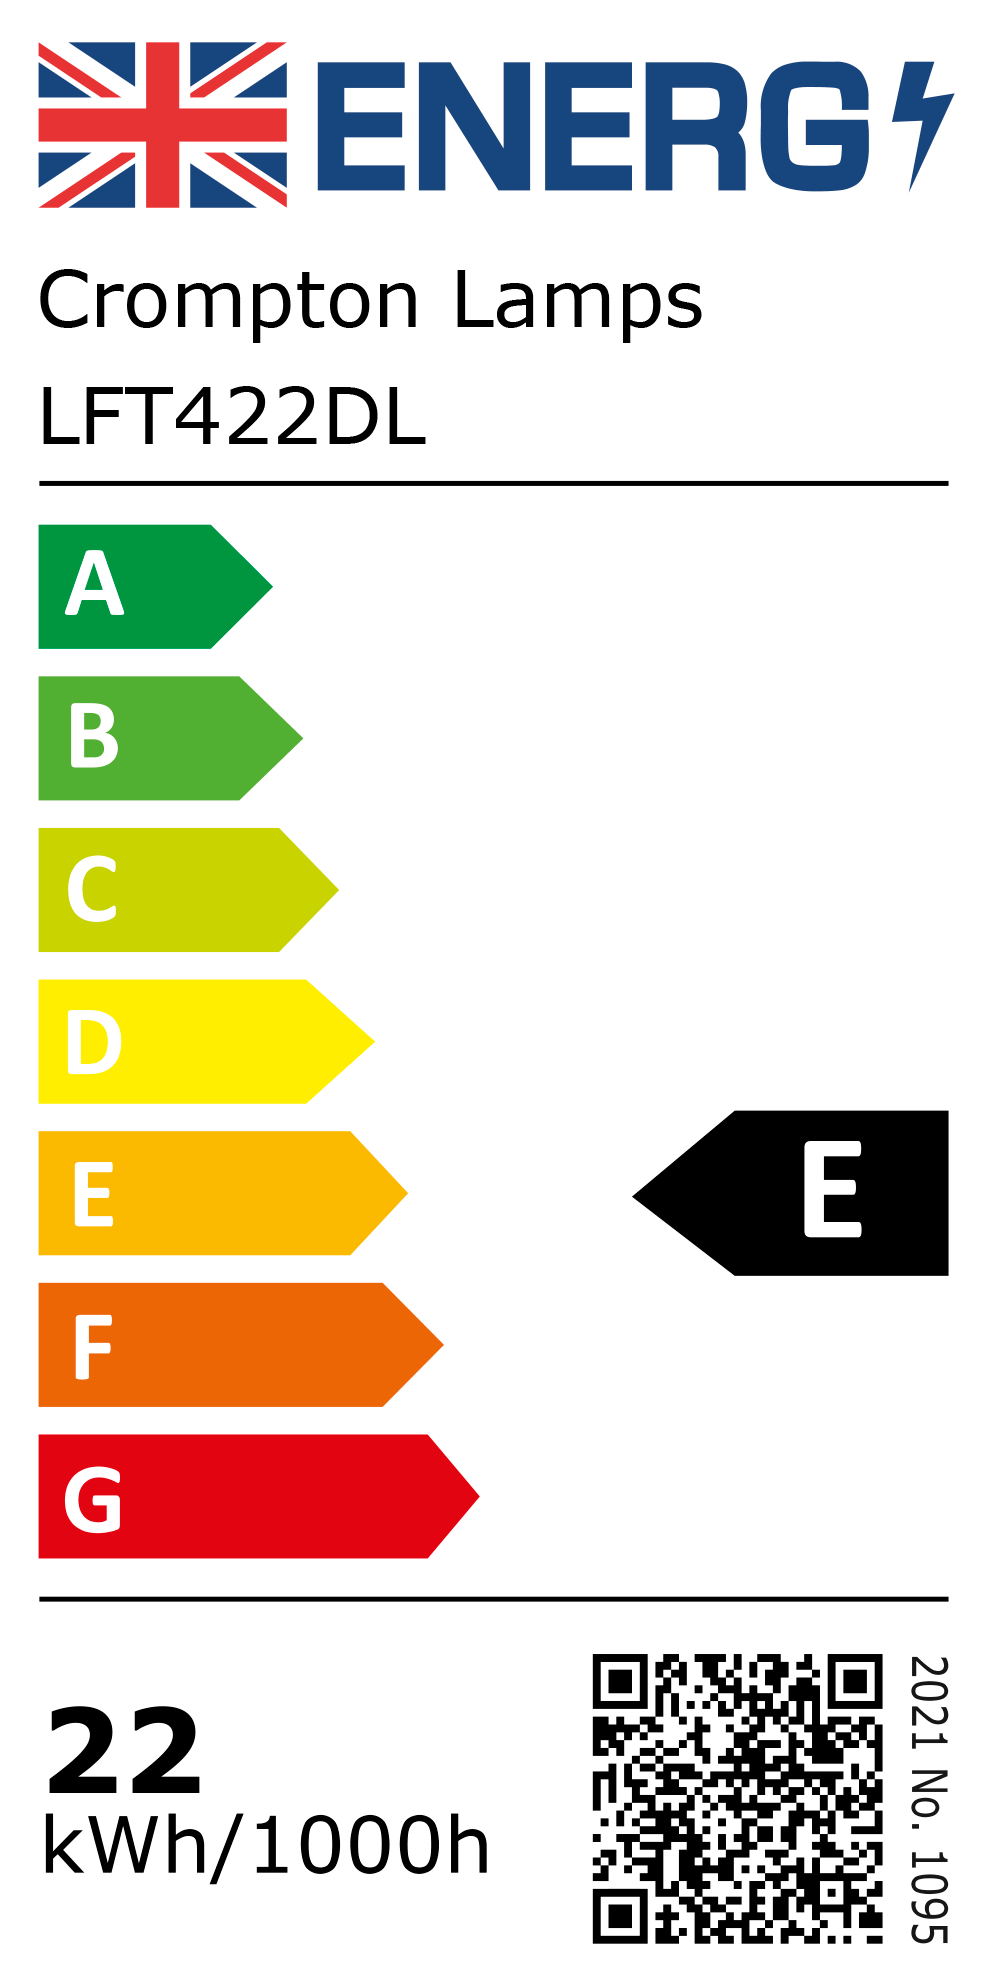 New 2021 Energy Rating Label: Stock Code LFT422DL